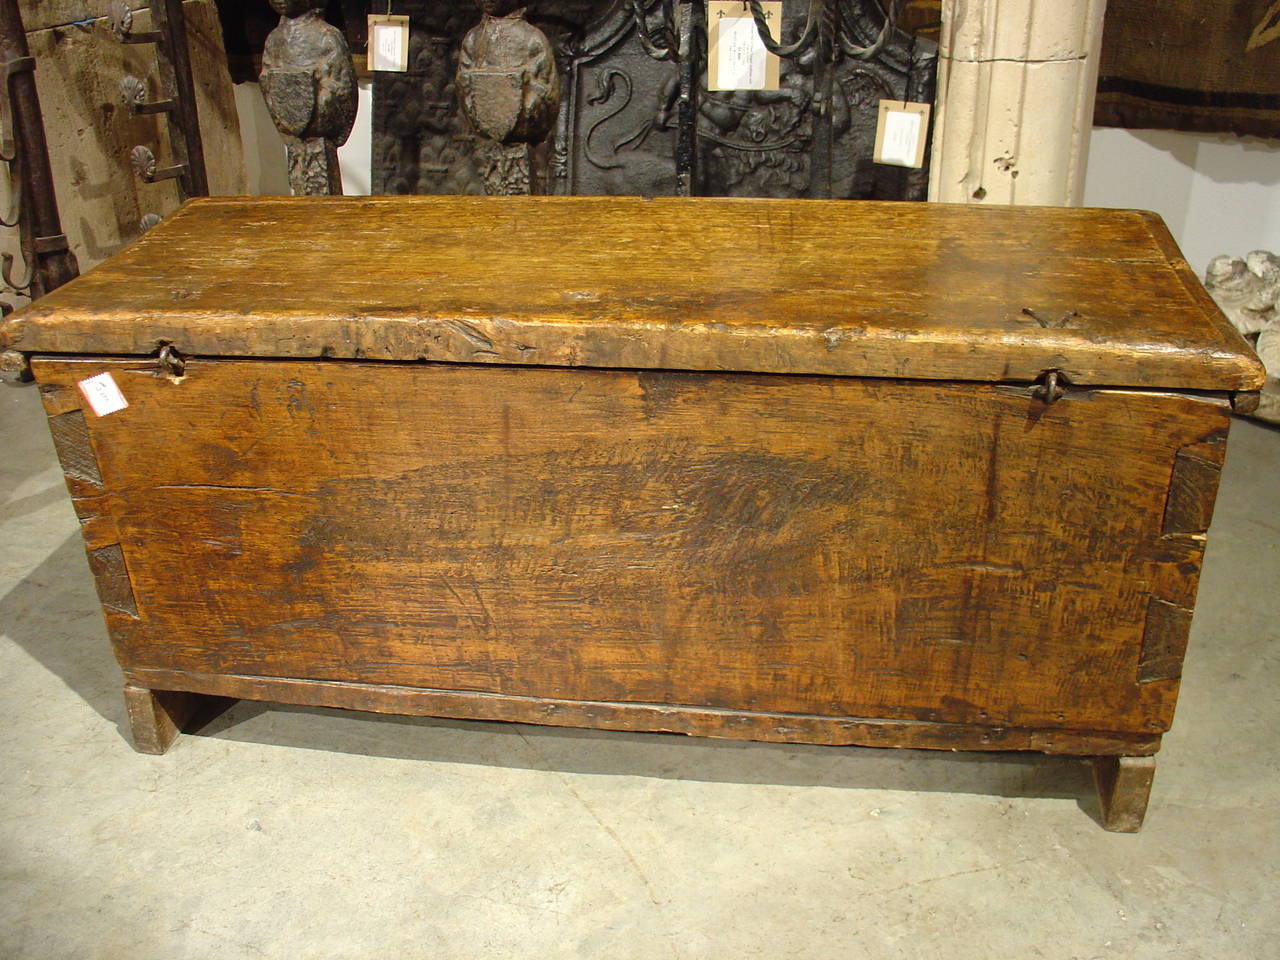 Charming small French trunk from the 1700's with nice thick top and original hinges. Single plank top and back boards.

This trunk has been made with dovetail construction using thick pieces of European Oak.  It has two hand carved shields on the